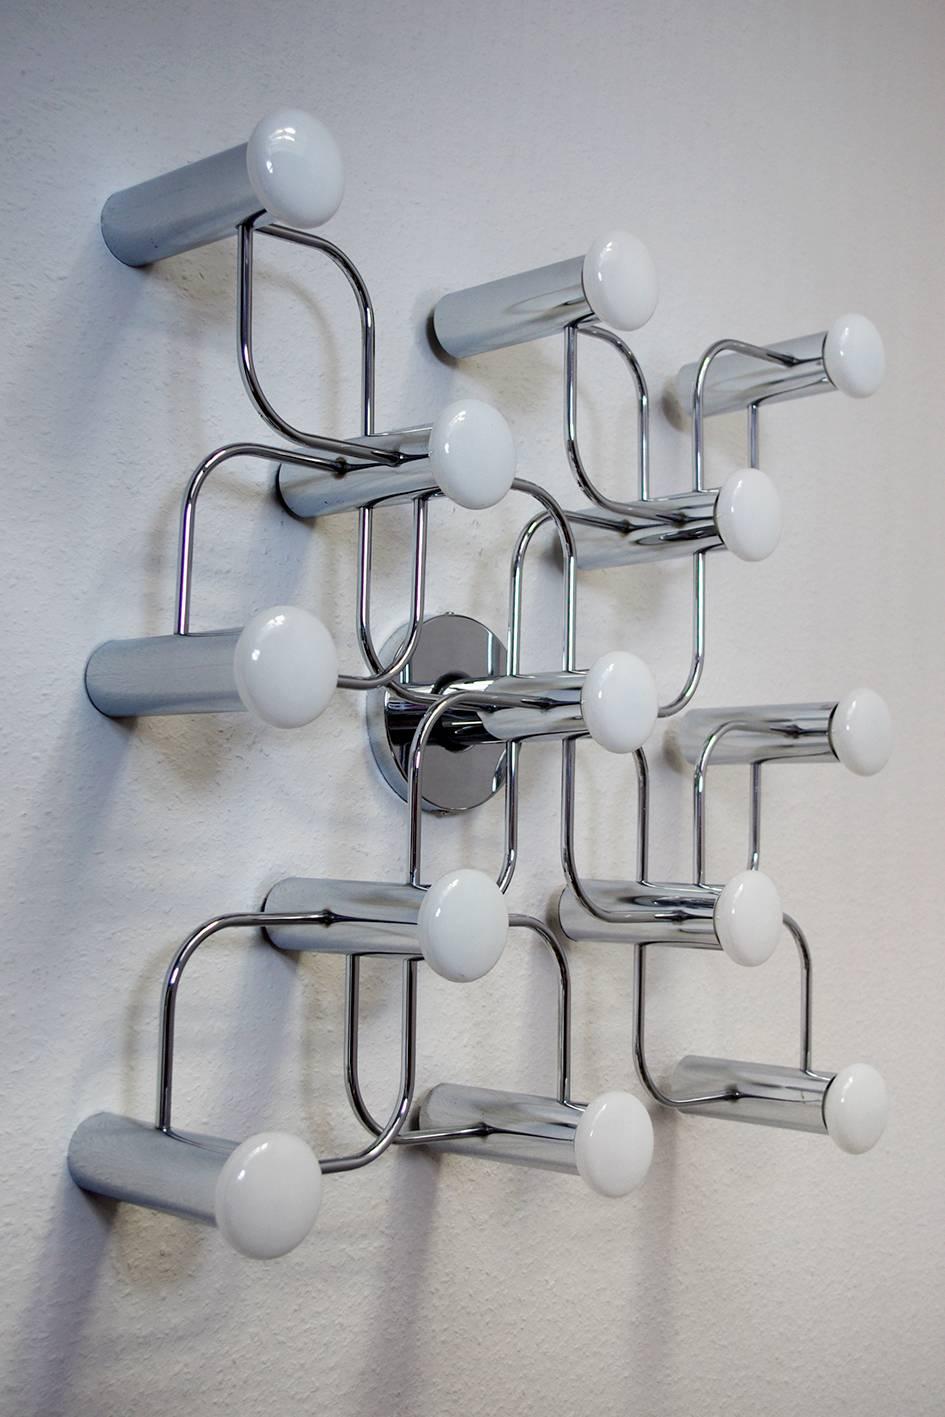 Sculptural Sciolari style ceiling or wall flush mount in chrome by Leola,
Germany, 1960s.

Lamp sockets: 13